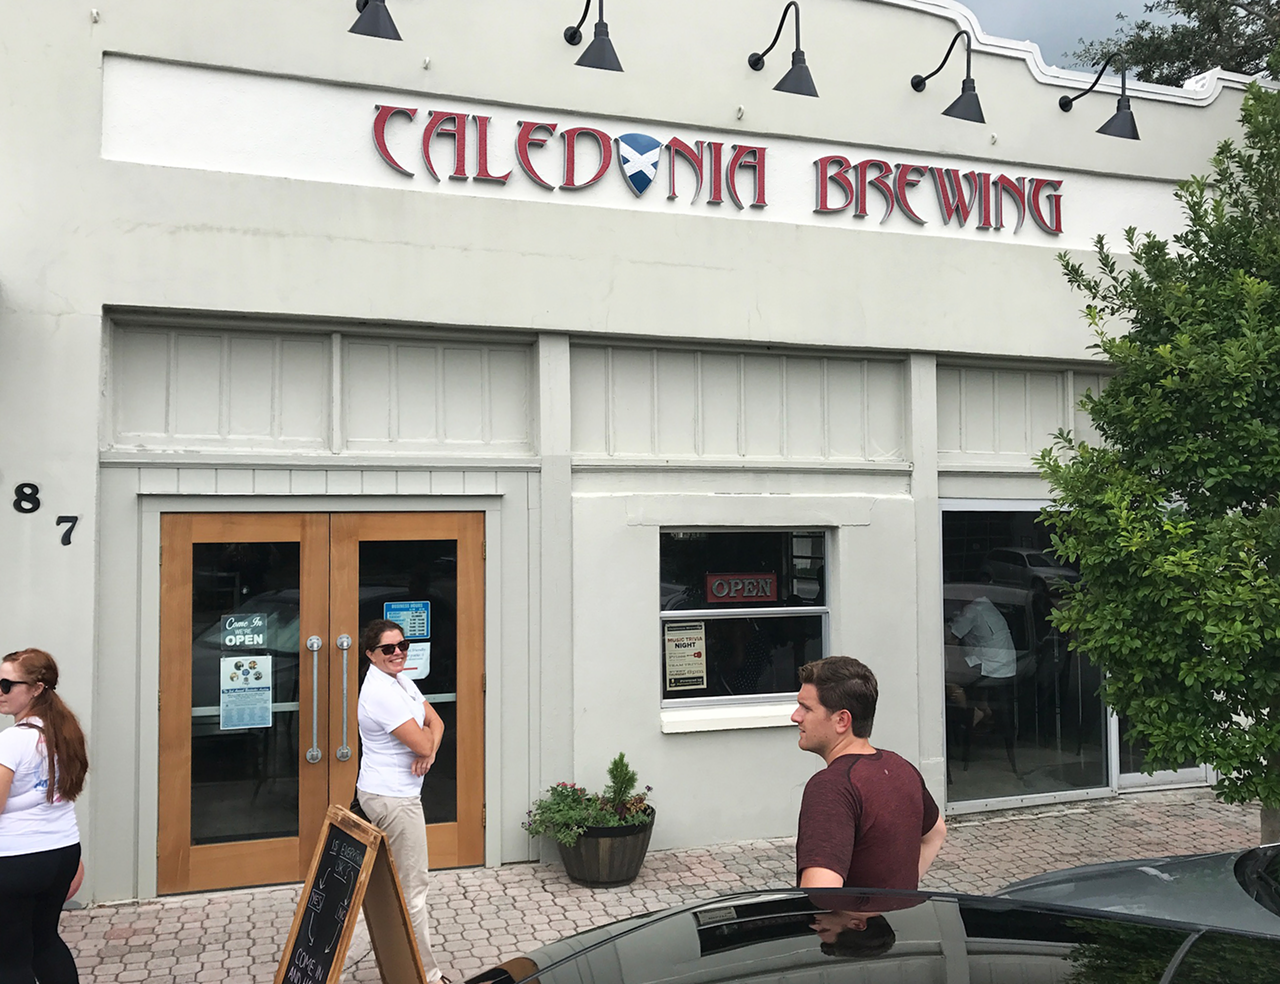 Caledonia Brewing, whose name is inspired by the city's Celtic roots, is housed inside the historic Dunedin Times building.